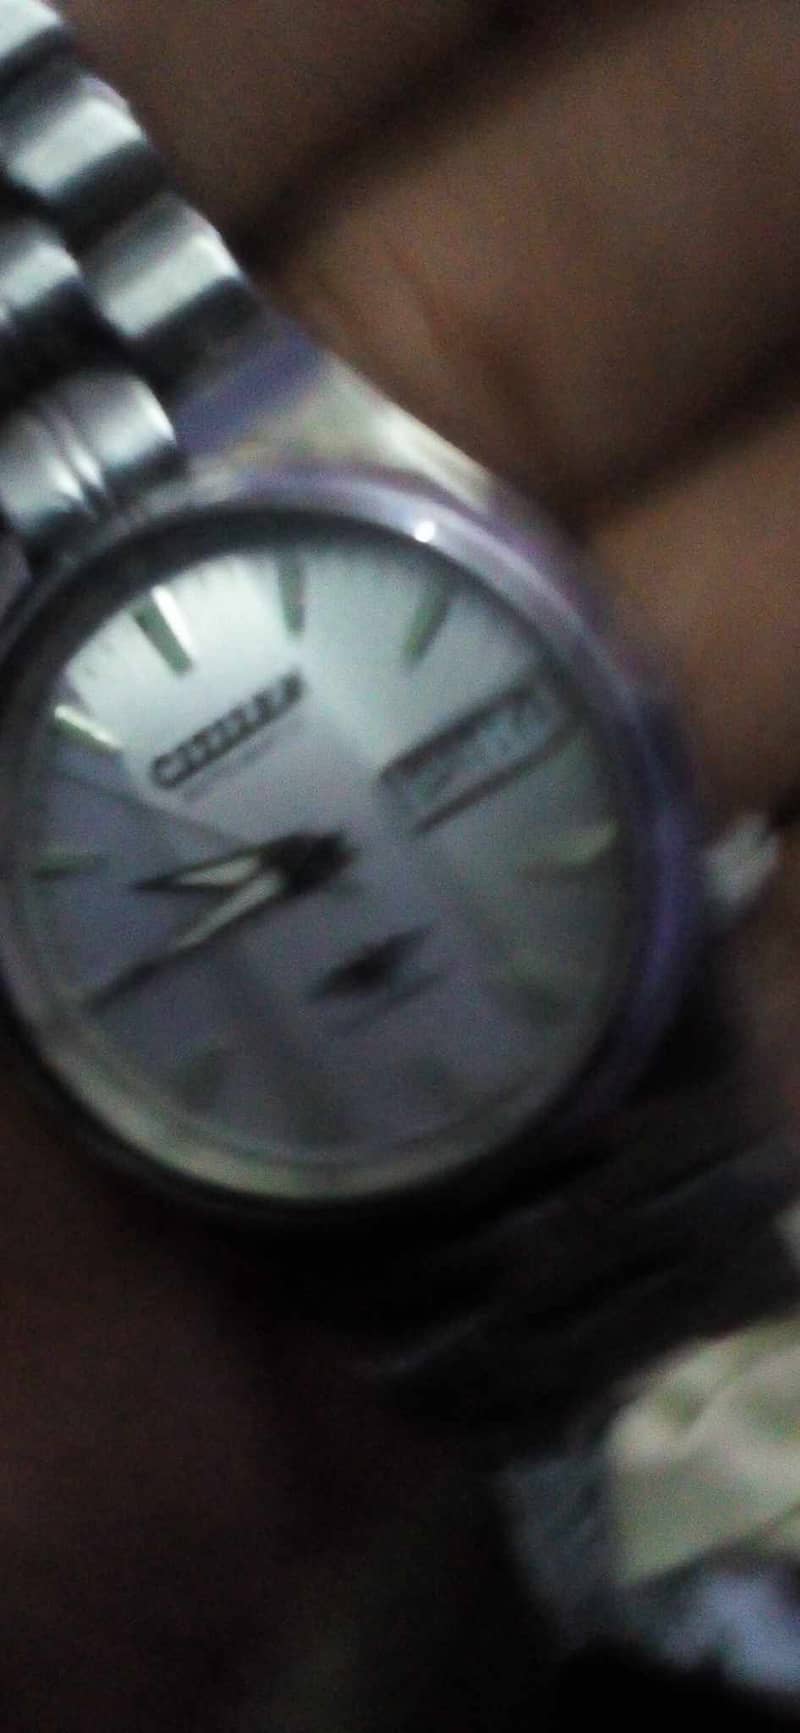 1967 expencive citizen automatic watch ,water prove 5